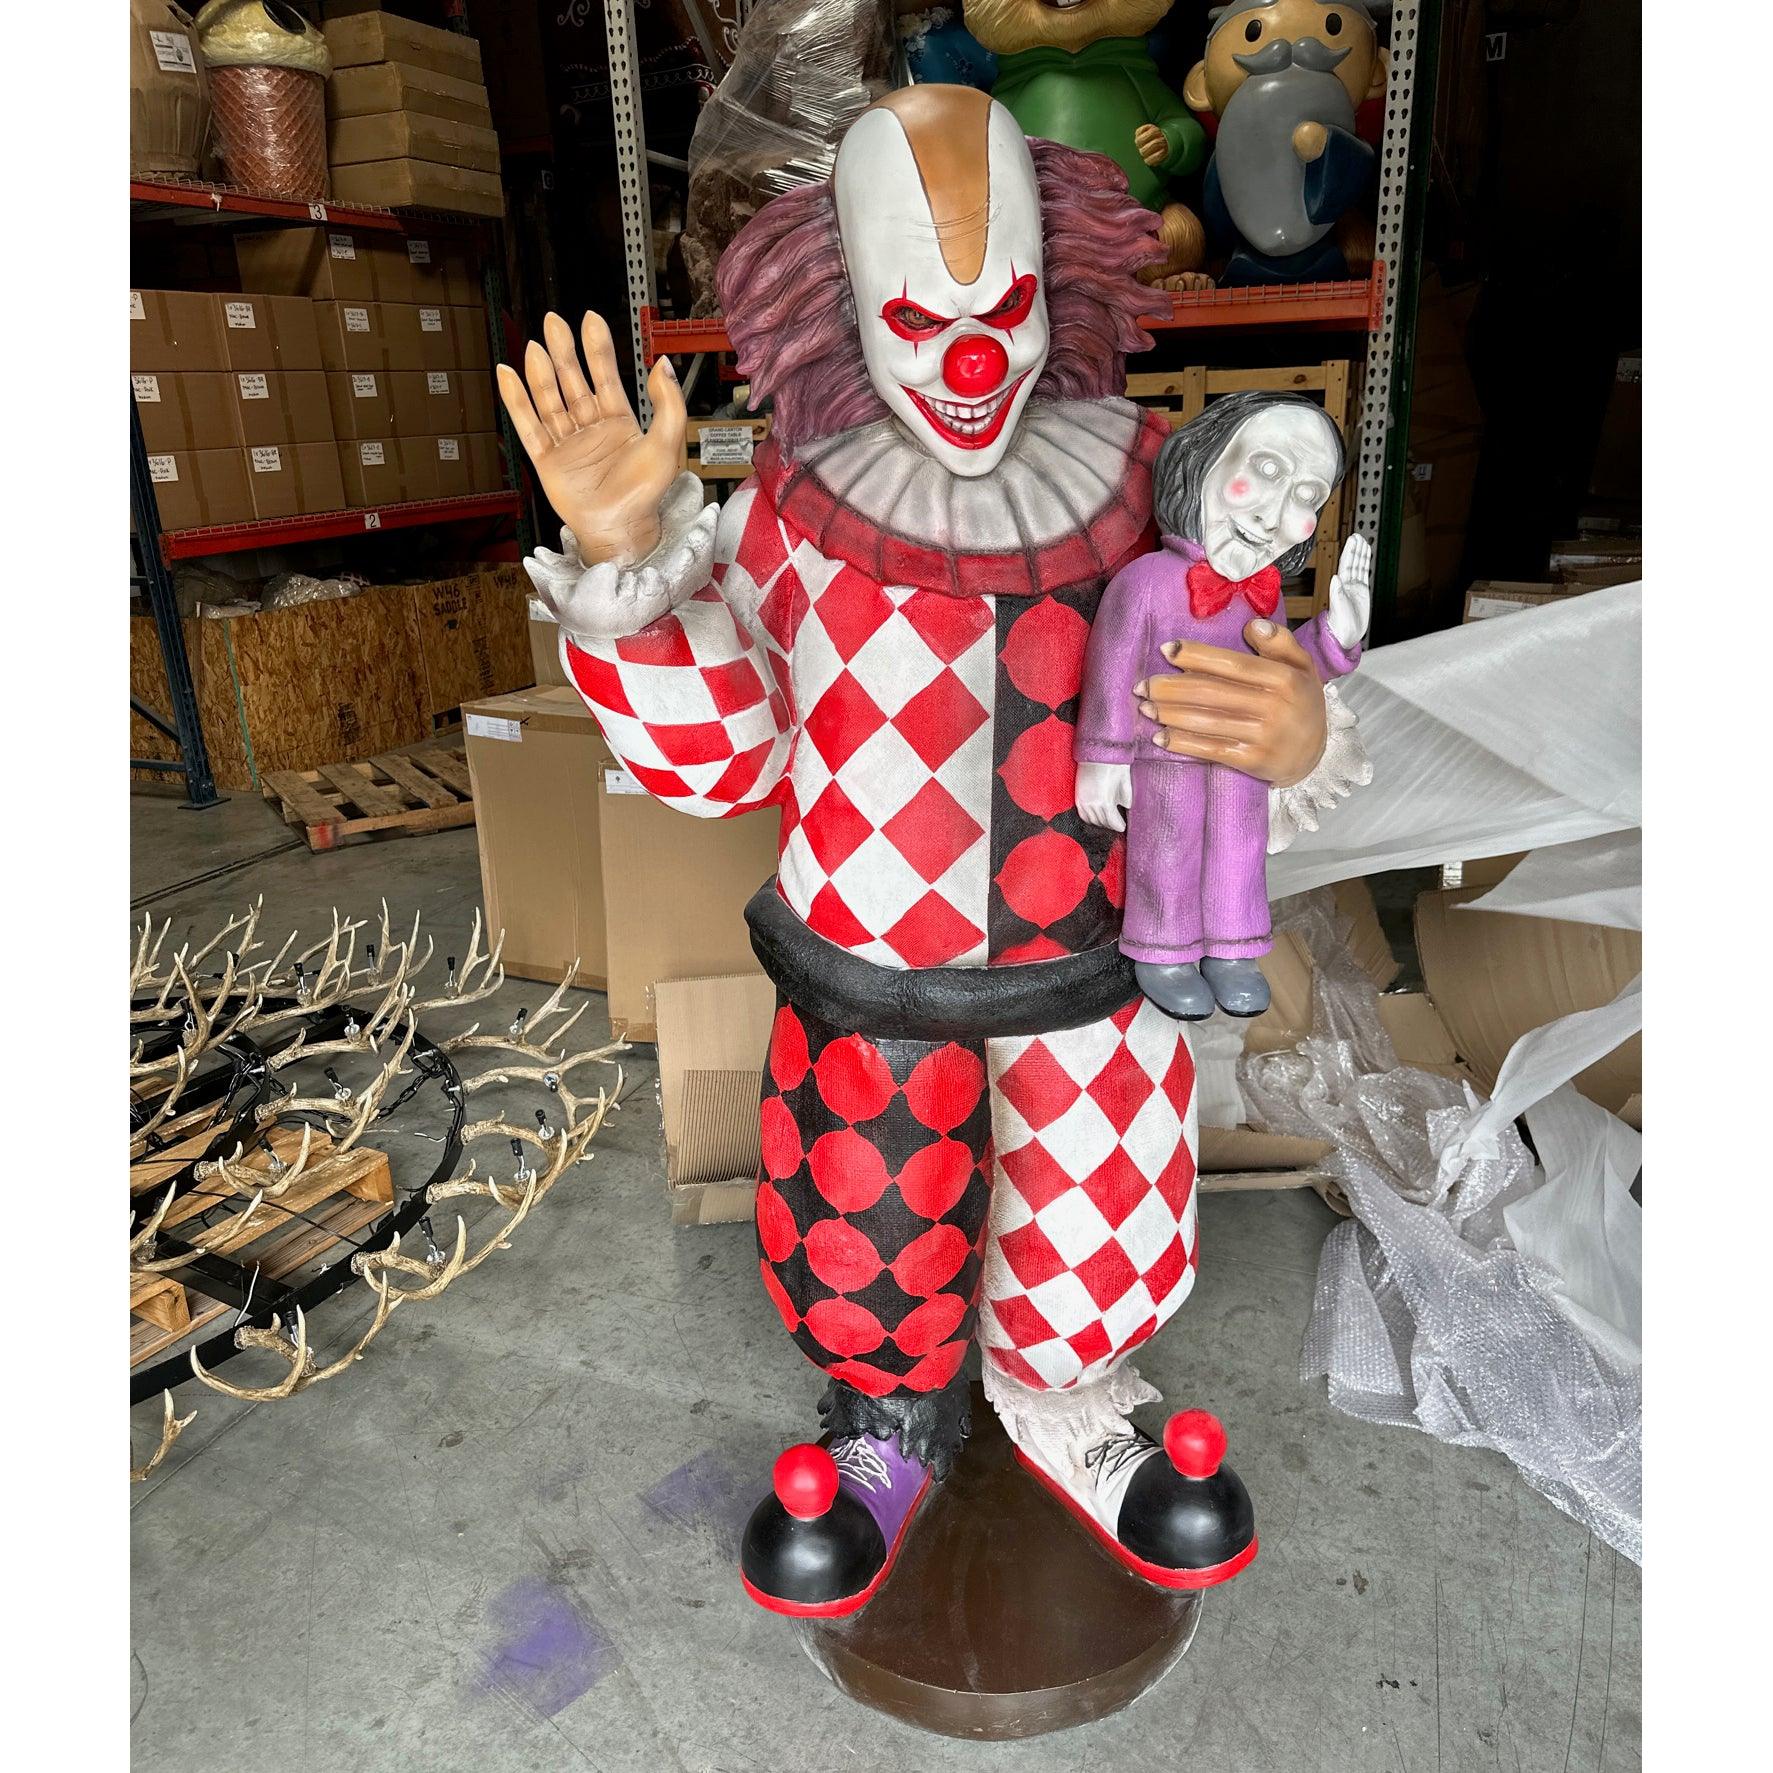 Jester Clown With Doll Statue - LM Treasures Prop Rentals 